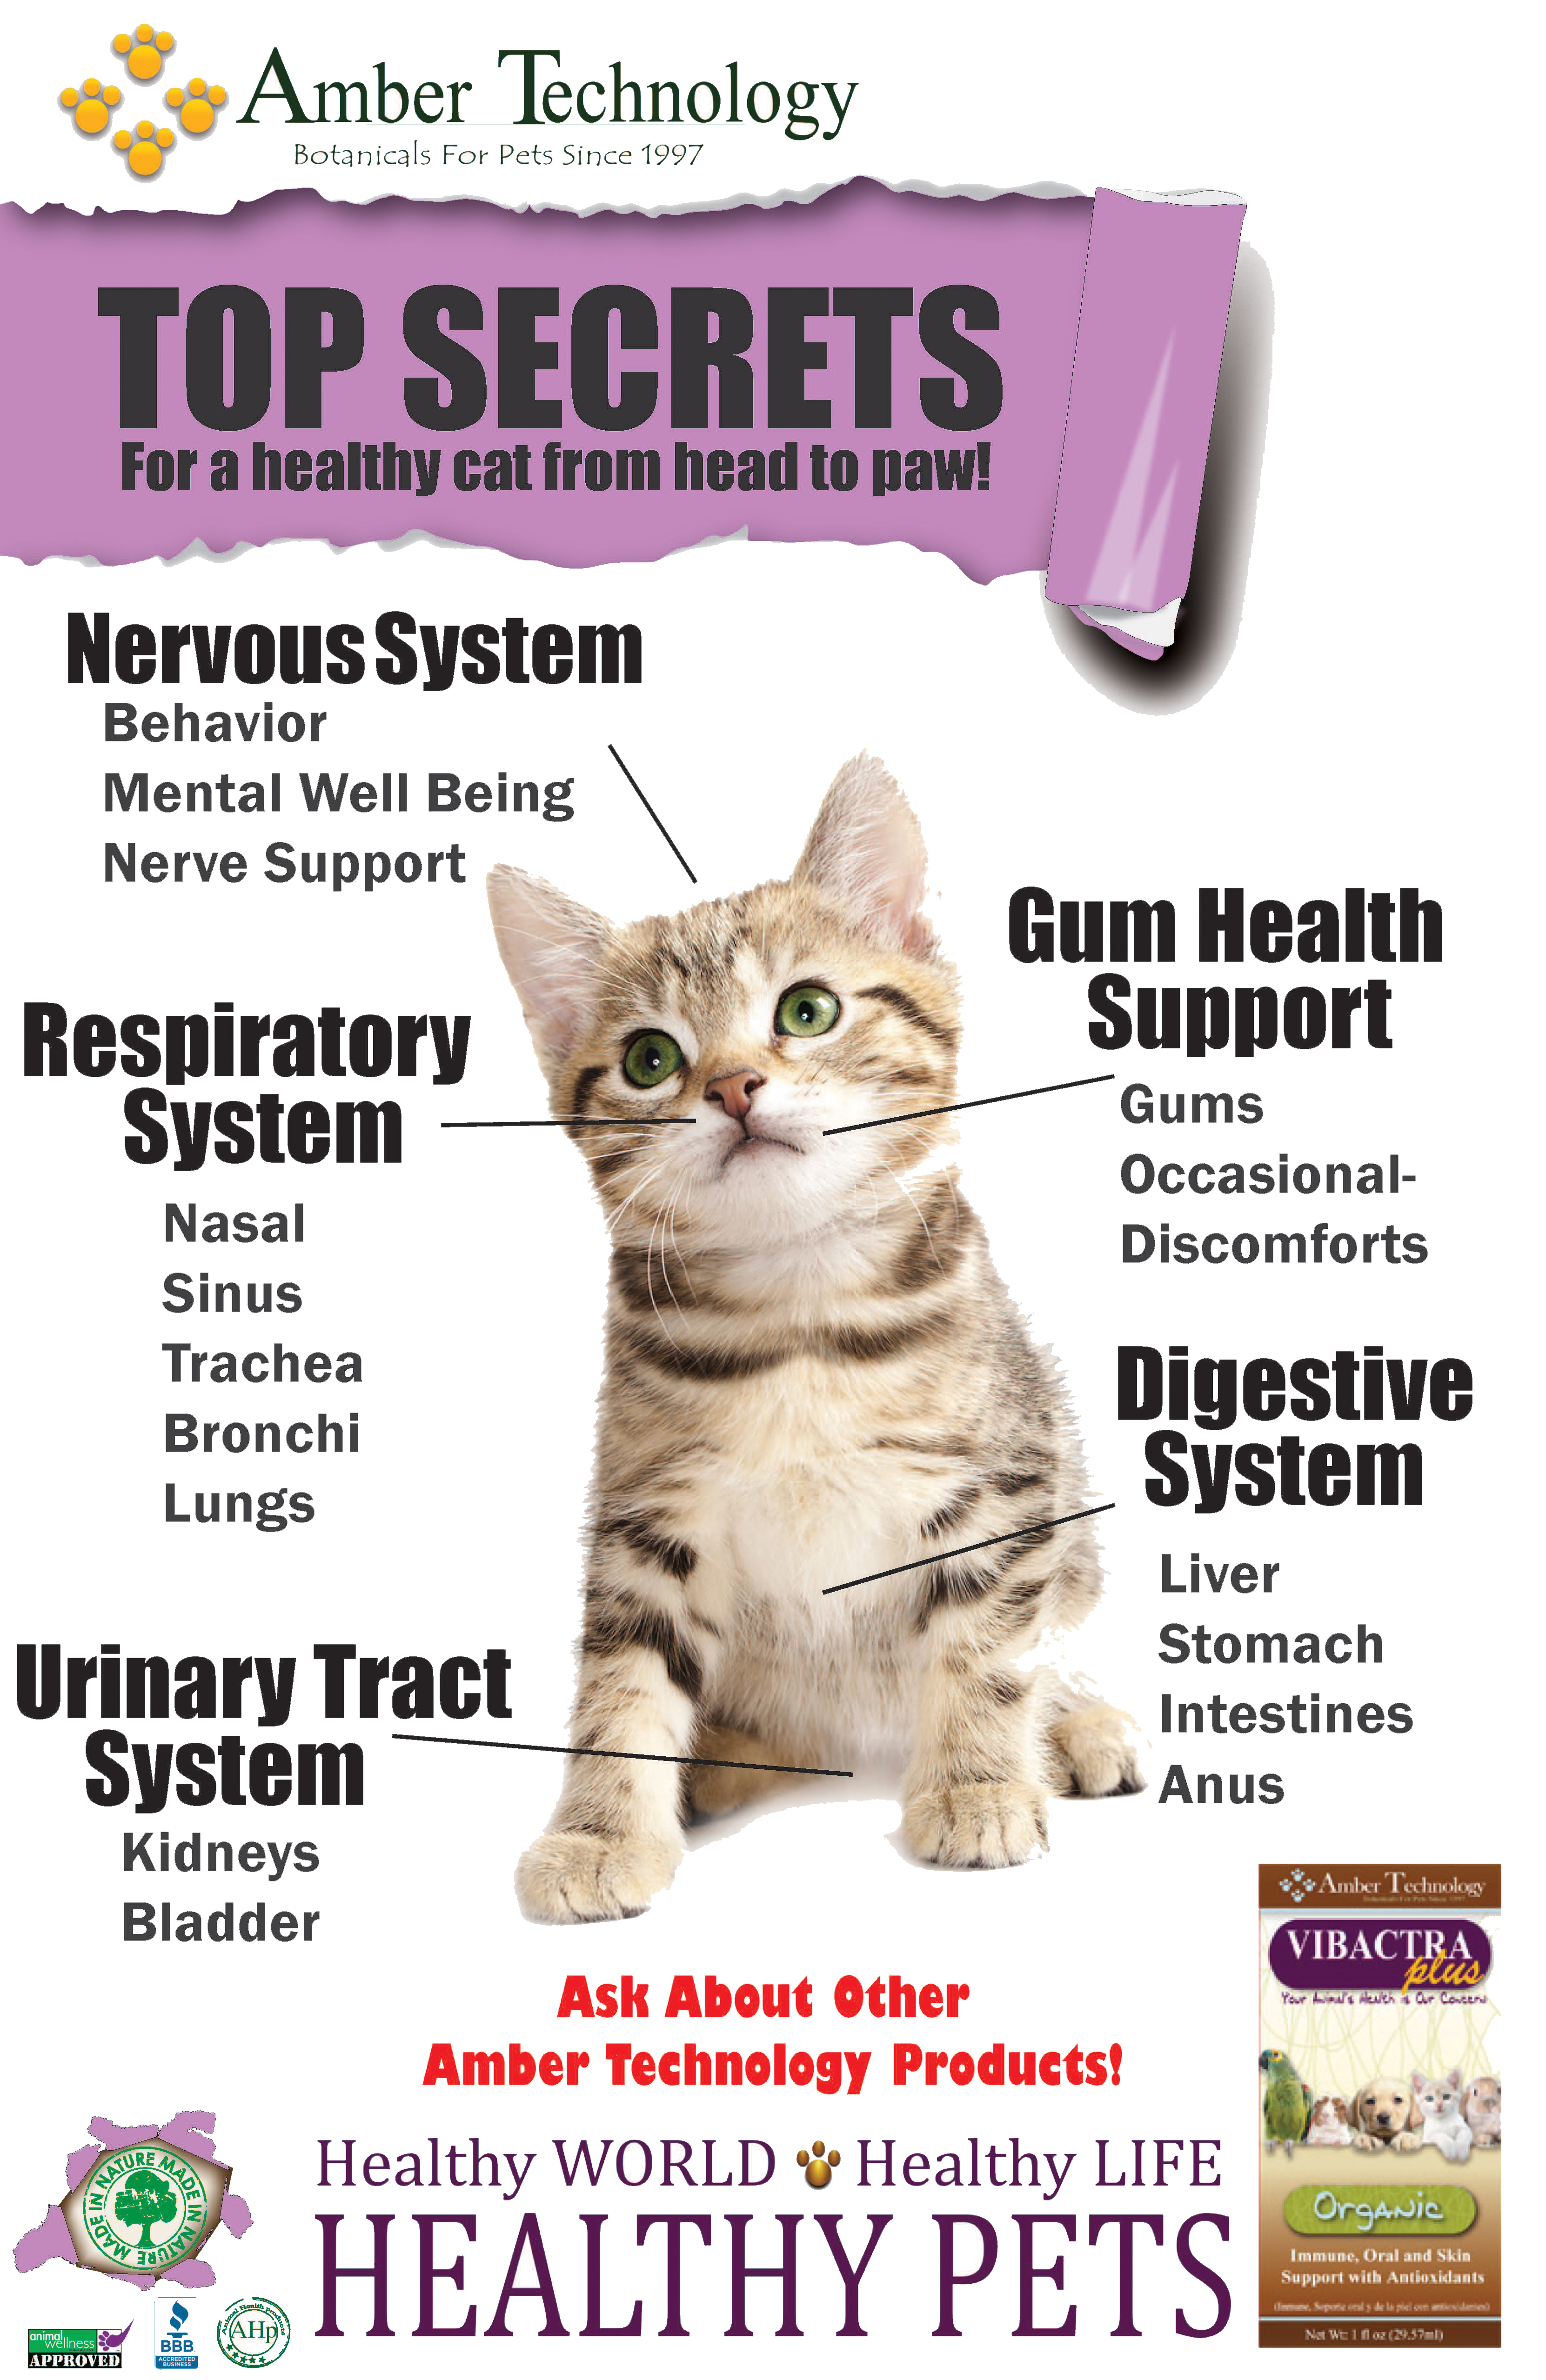 Natural Canine Health Care Kits are an excellent value.  The Canine Health Care Kit contains:  Kitty-DT (aka Kitty Distempaid), Vibactra Plus, Life Cell Support, Vintesta (aka Pet's Cough & Cold Formula), Kidney Rejuvenator, UTR (aka Urinary Tract Relief), a syringe, bandaids, and a leash.  ORDER YOUR PET HEALTH CARE KIT NOW